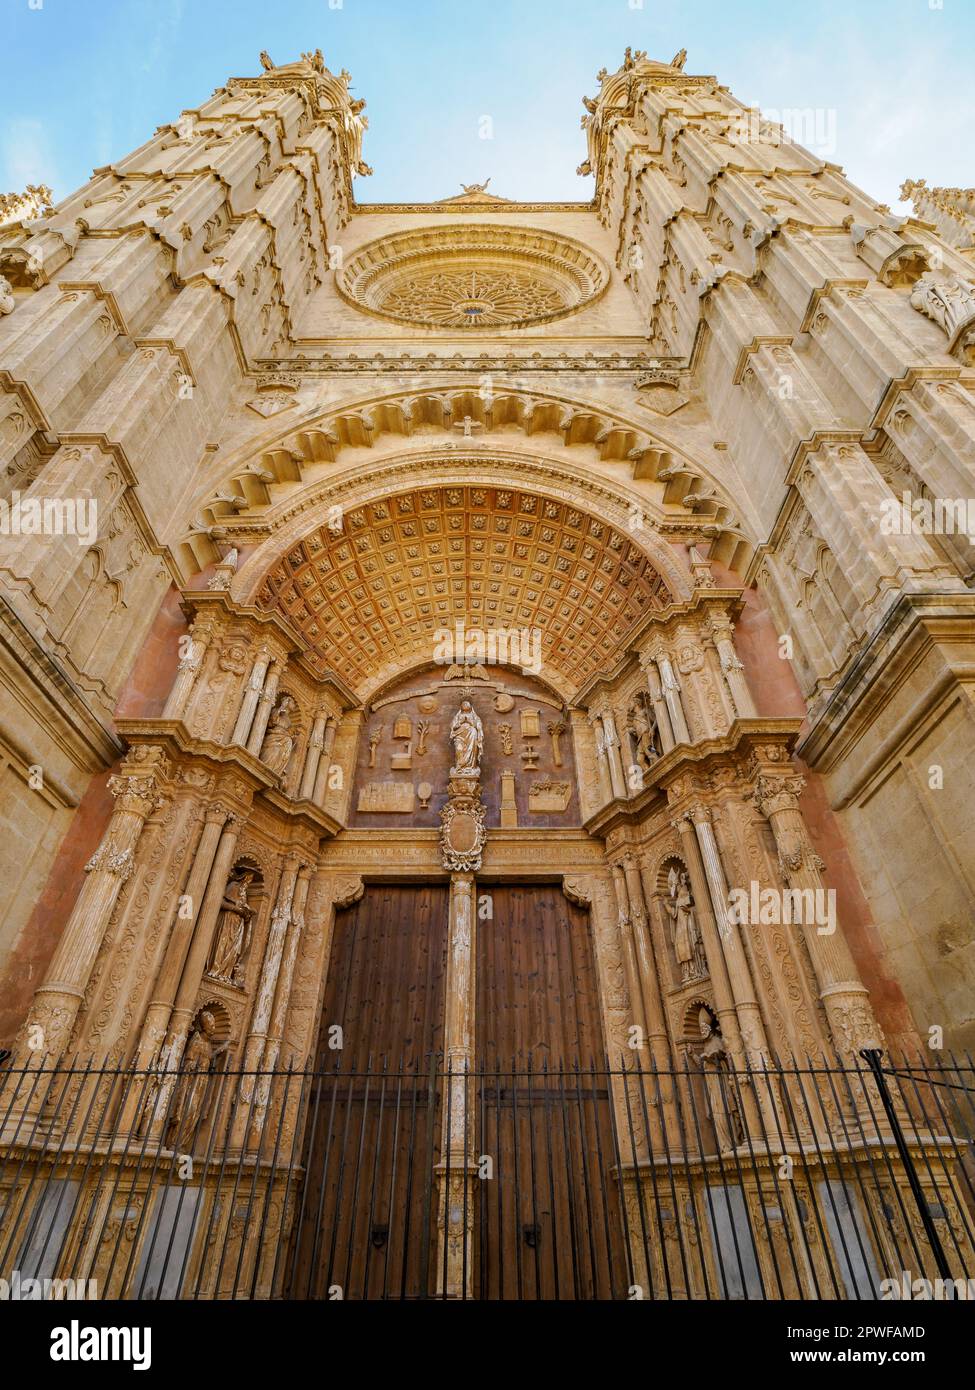 Looking up at the great entrance portal and rose window of the Cathedral of Santa Maria de Palma in Majorca Stock Photo